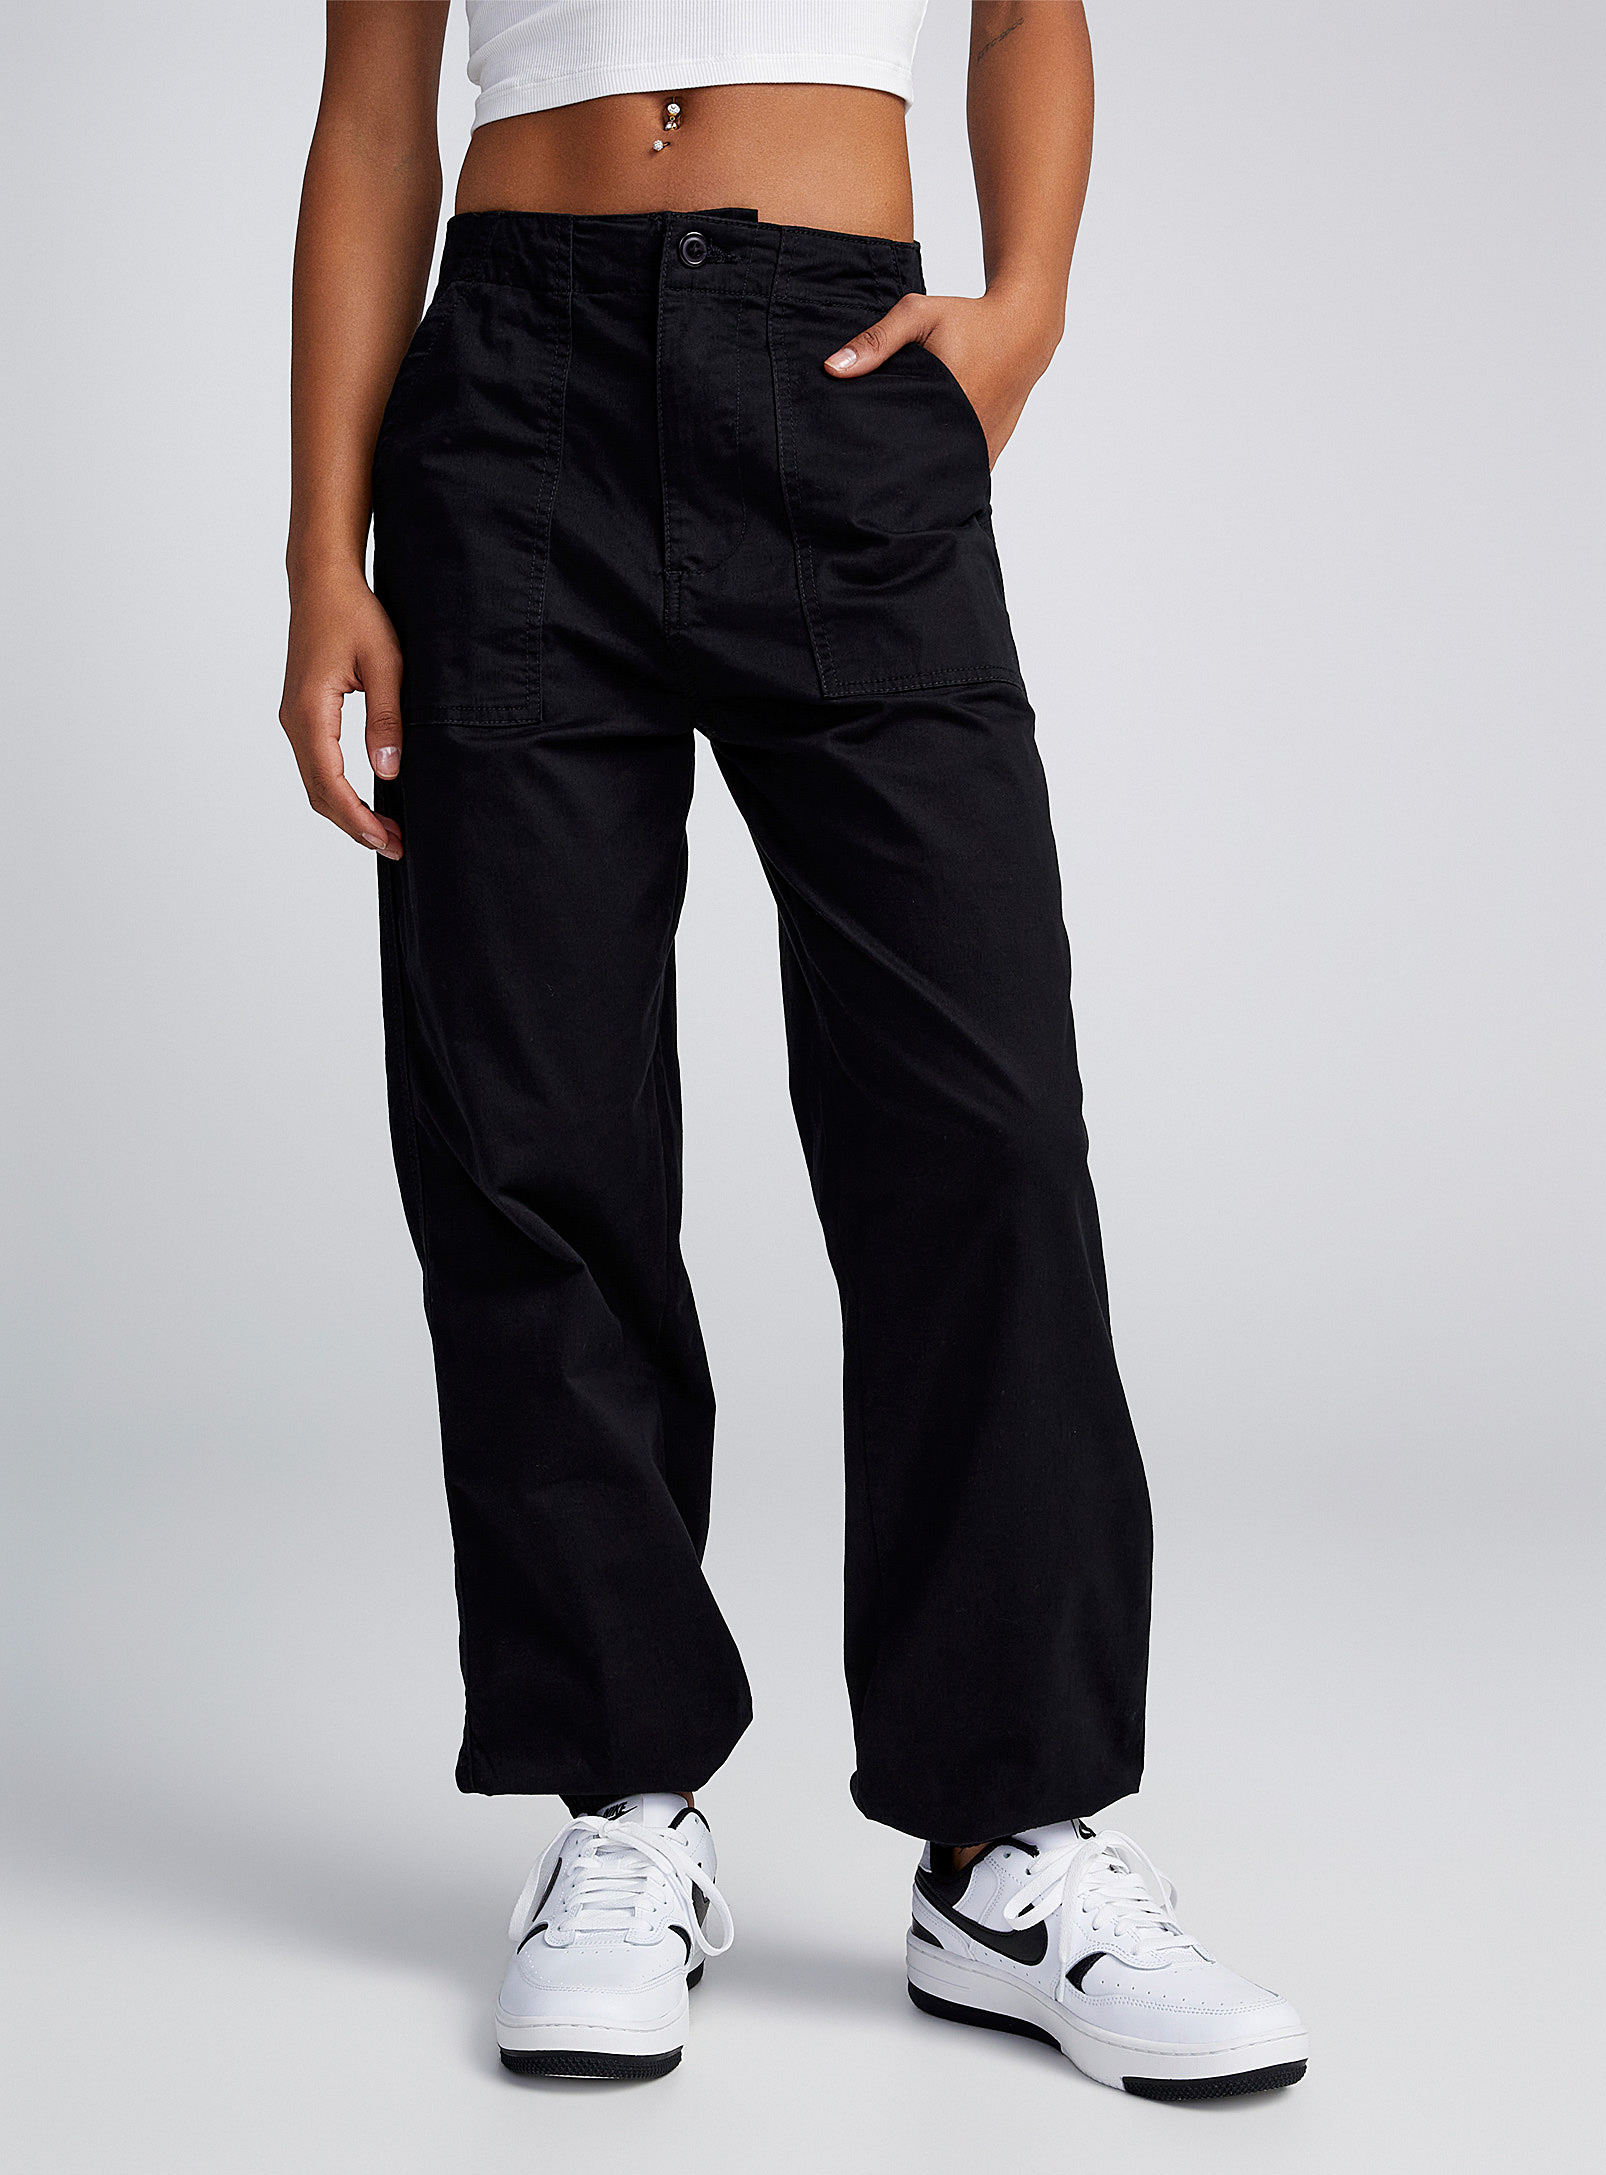 Twik Patch Pockets Chino Jogger In Black